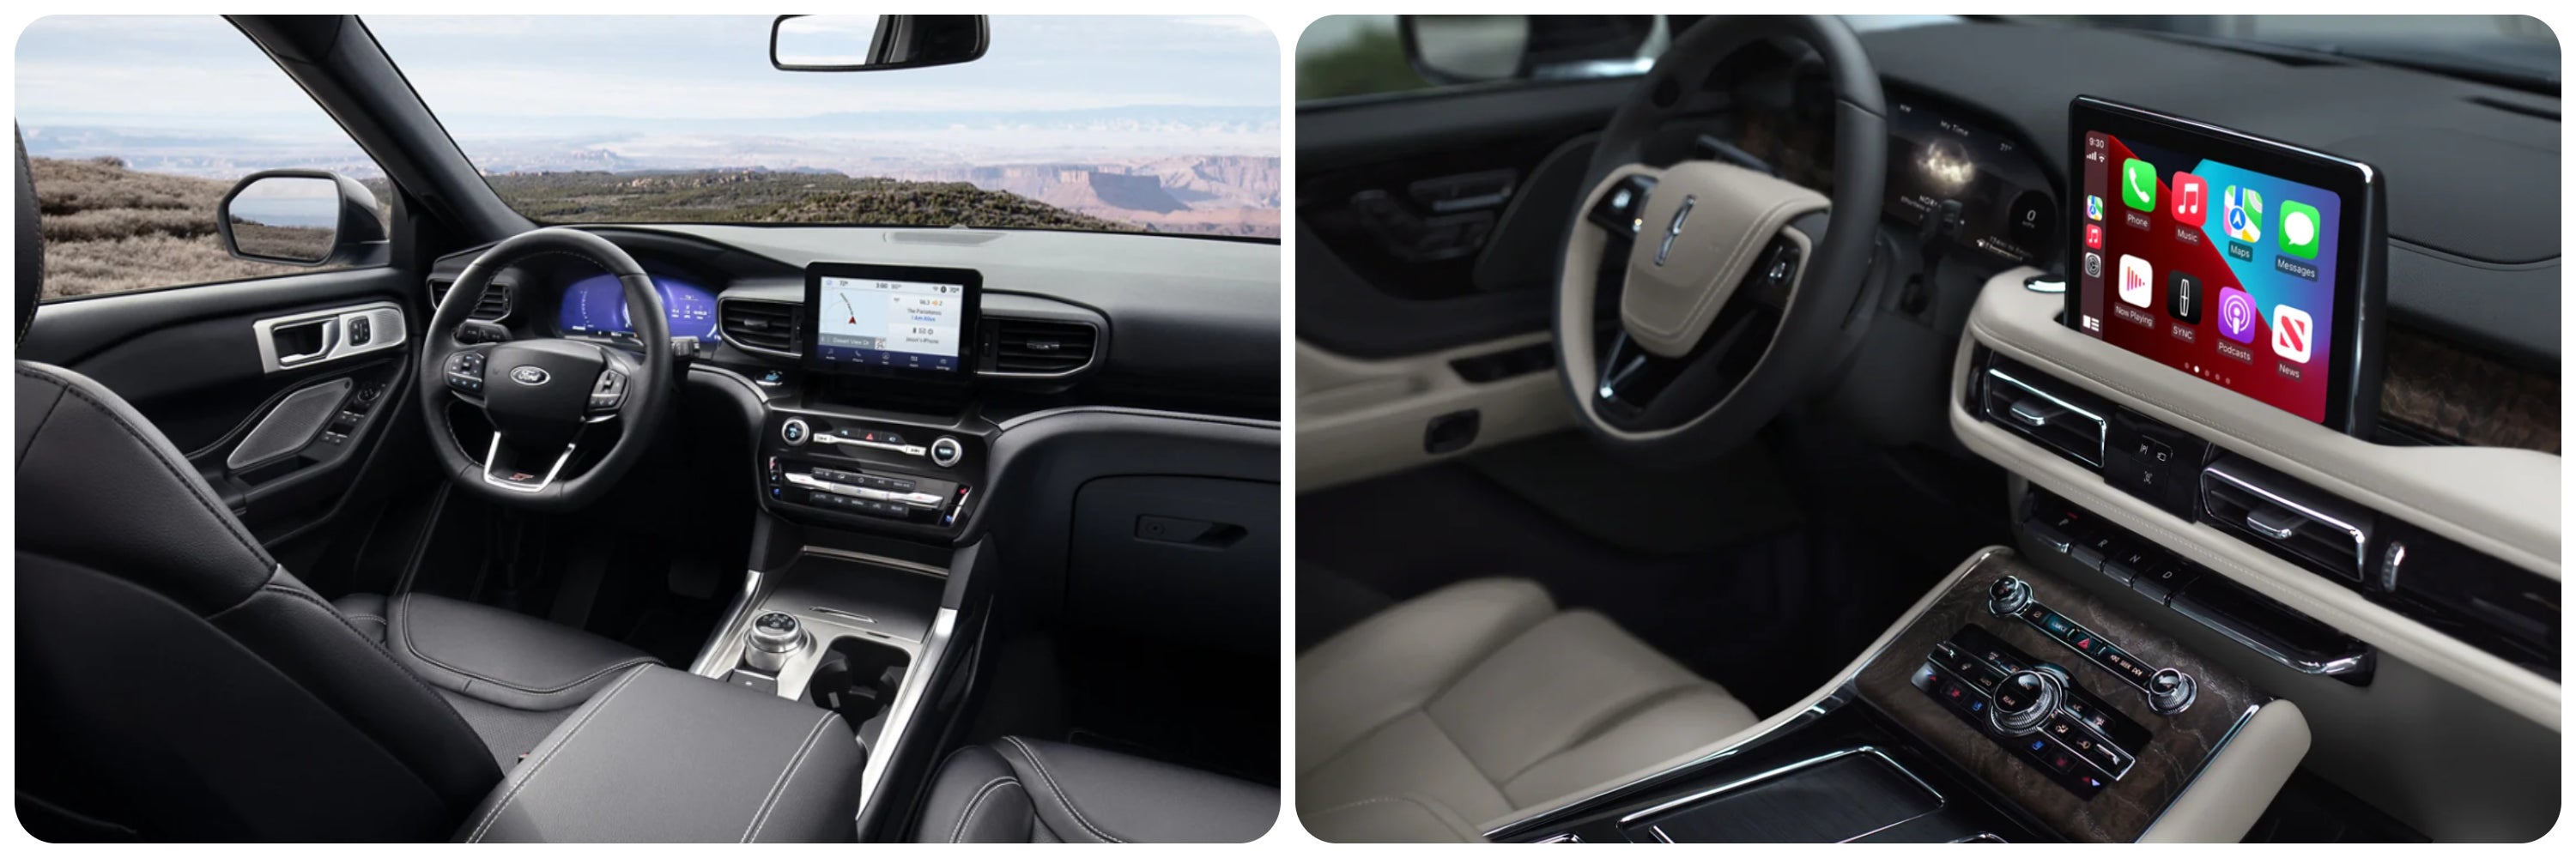 A view of the dash and infotainment system of the 2023 Ford Explorer on the left and the 2023 Lincoln Aviator on the right.